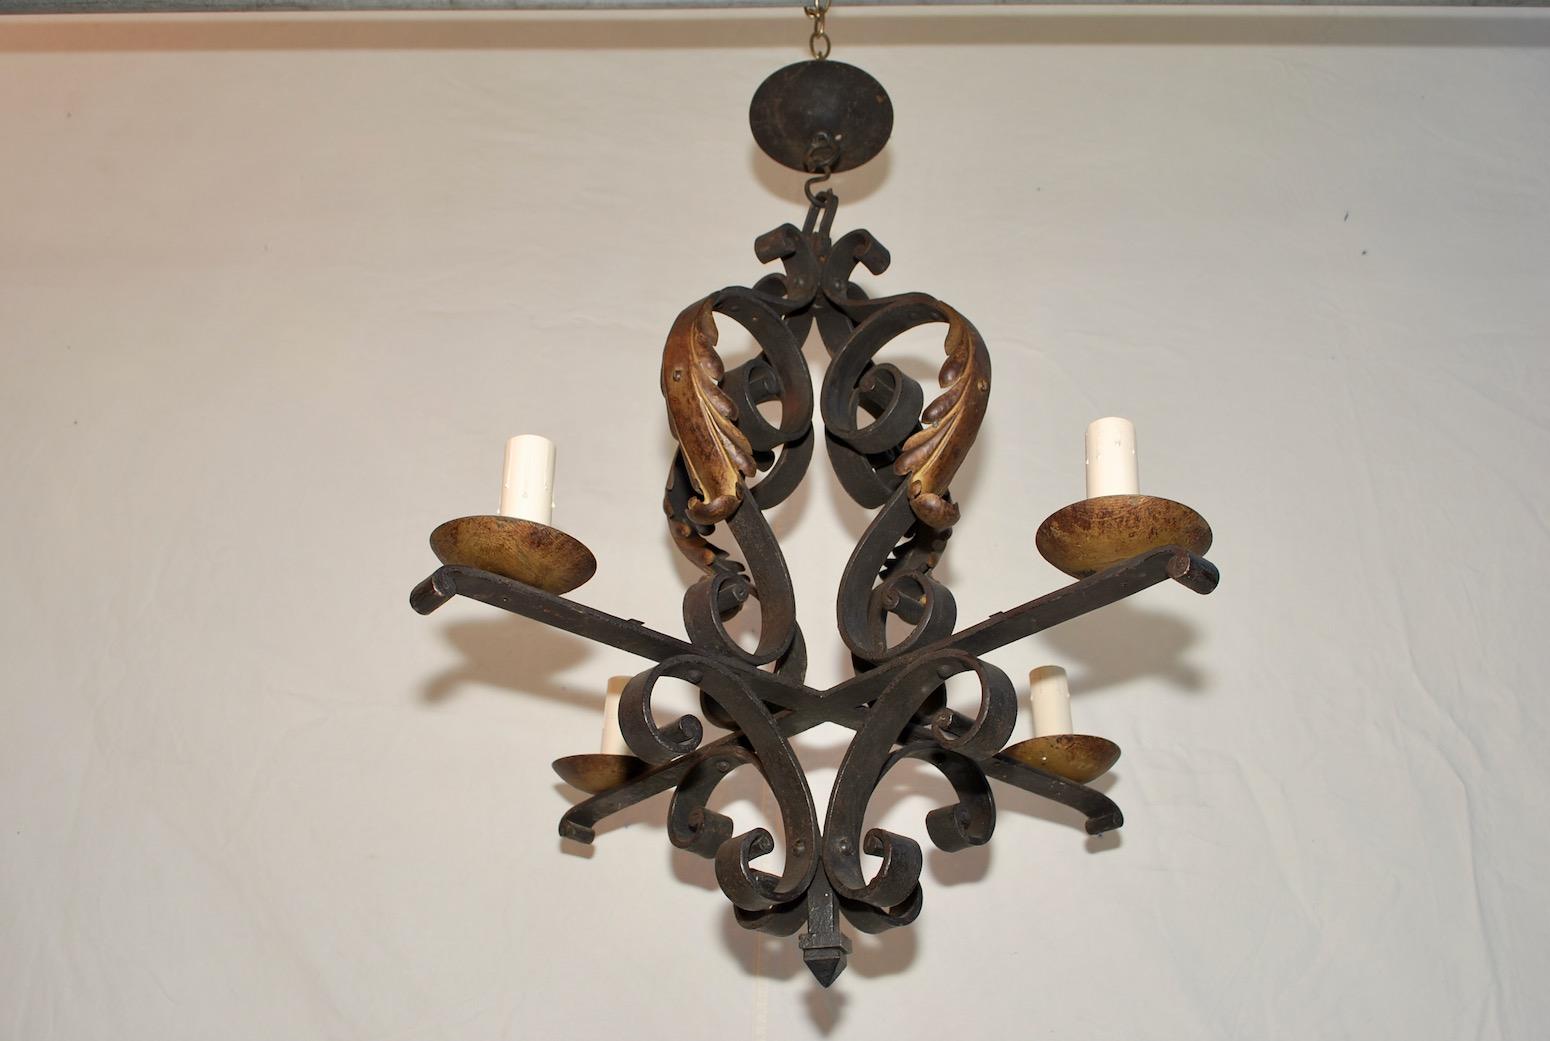 Hammered Elegant French 1920s Wrought Iron Chandelier